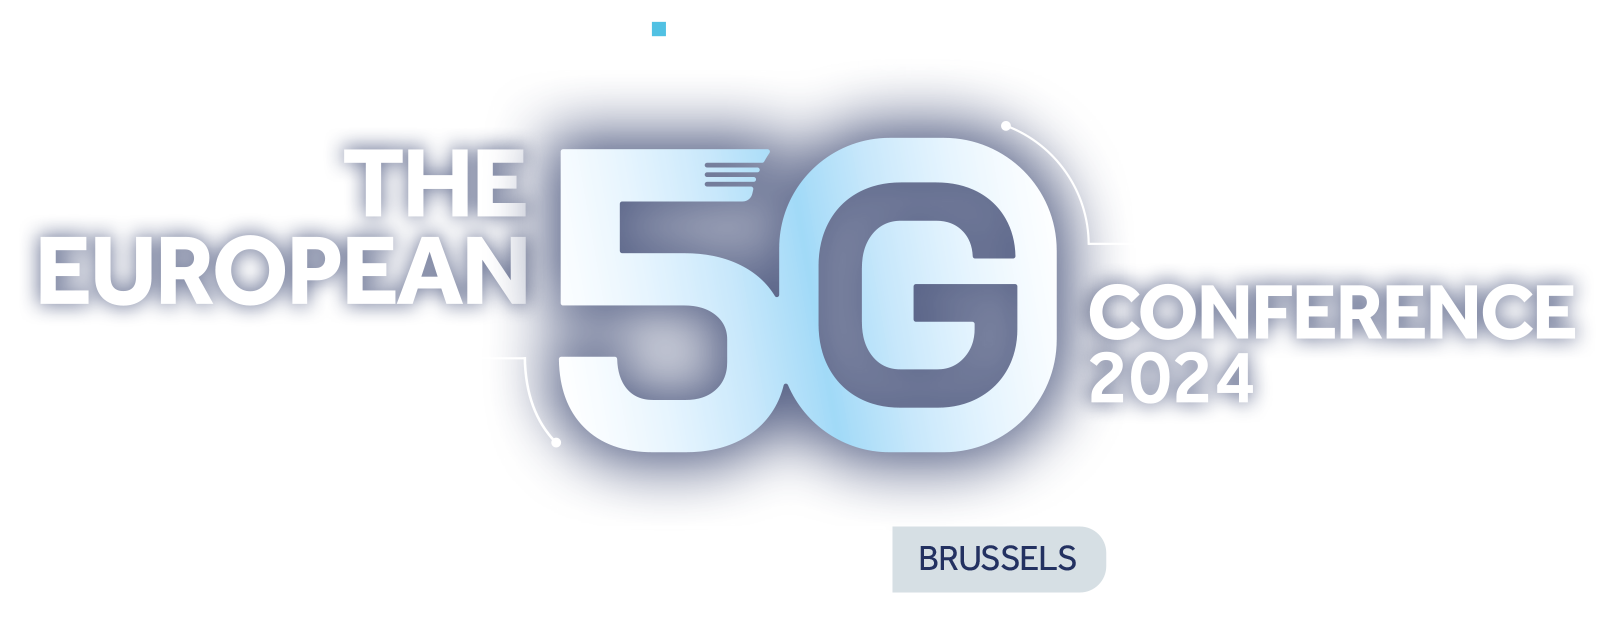 The European 5G Conference 2024